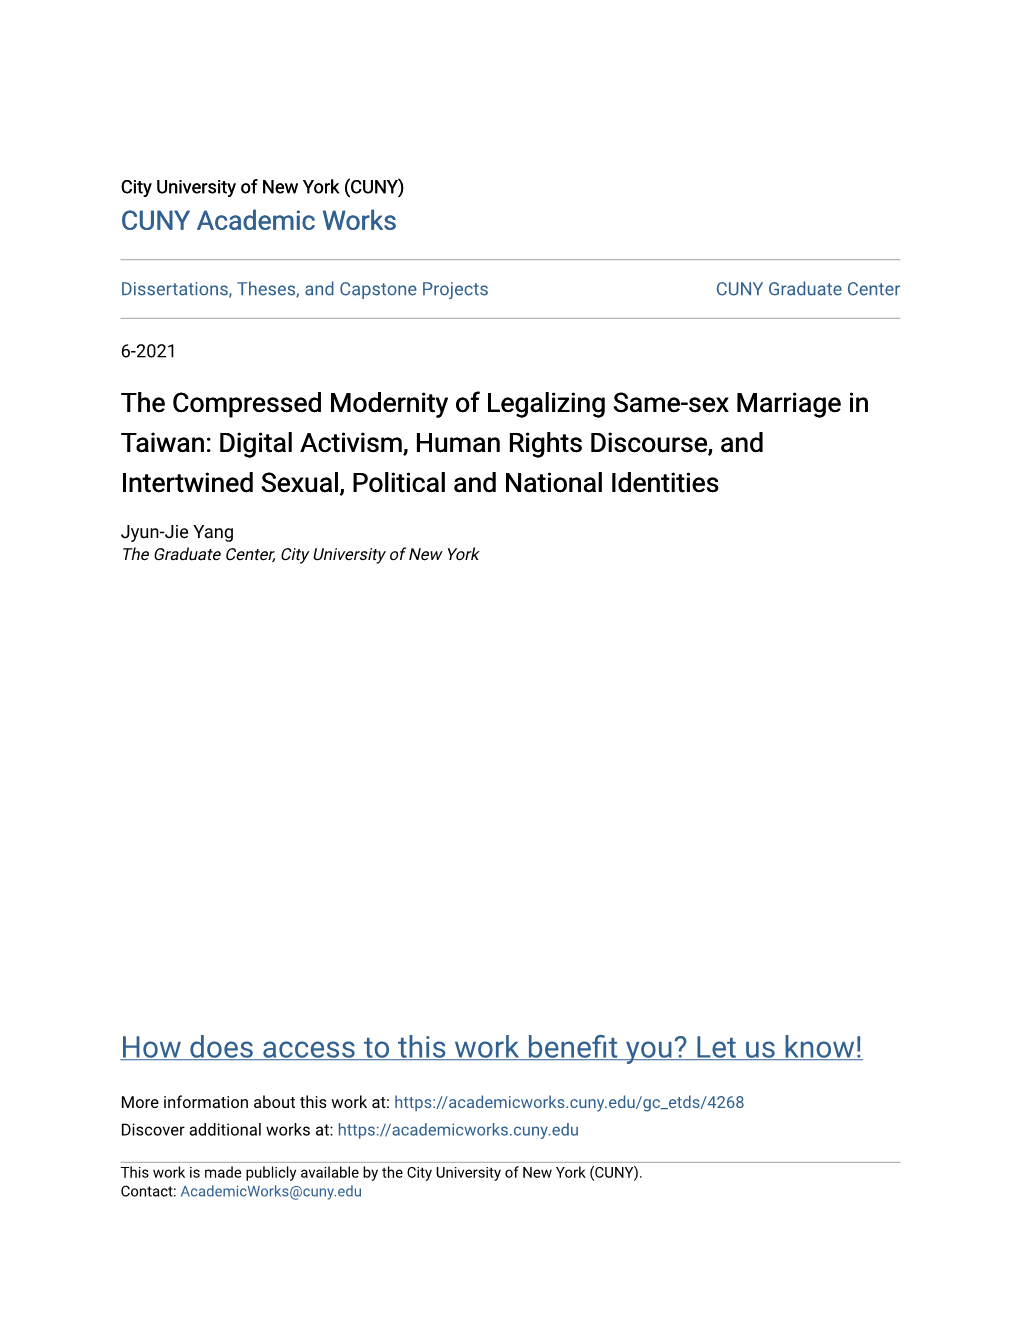 The Compressed Modernity of Legalizing Same-Sex Marriage In